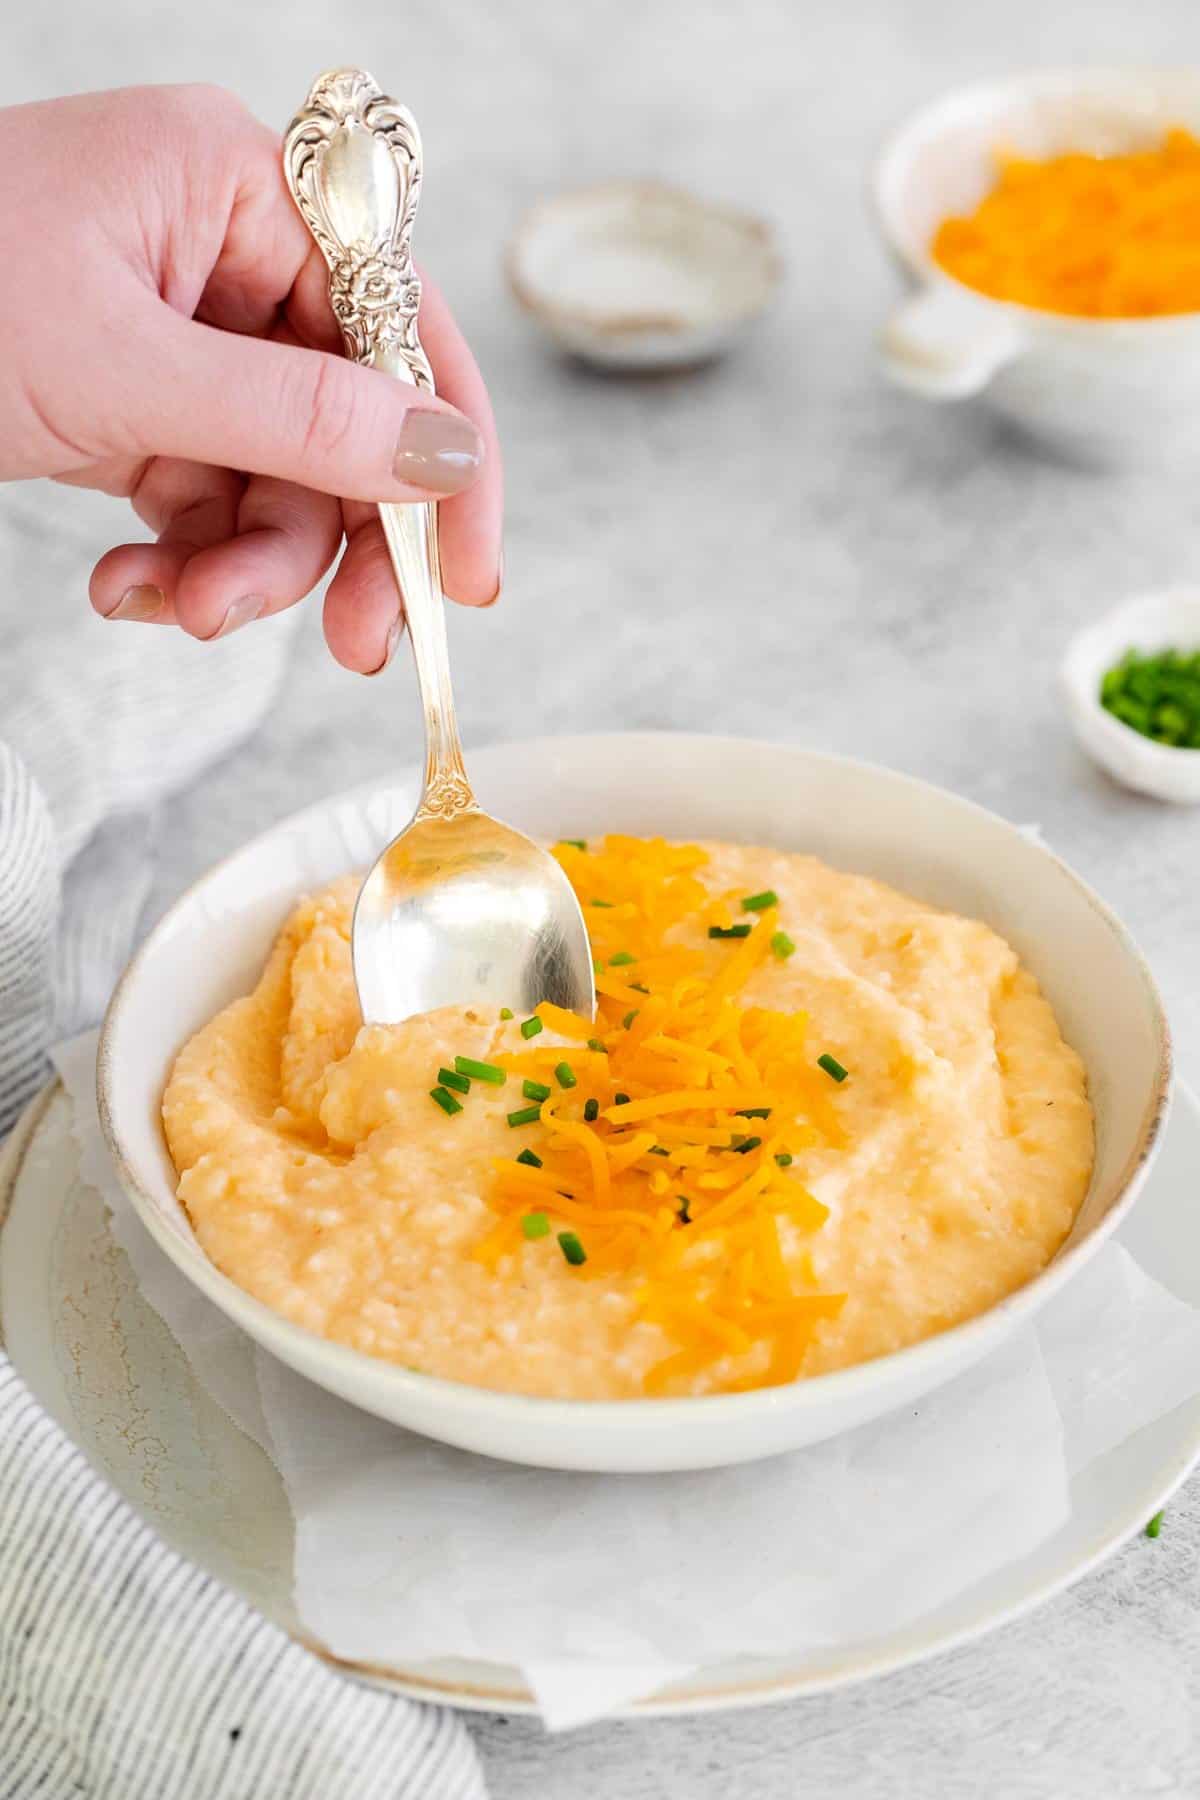 Cream cheese grits in a bowl with a spoon